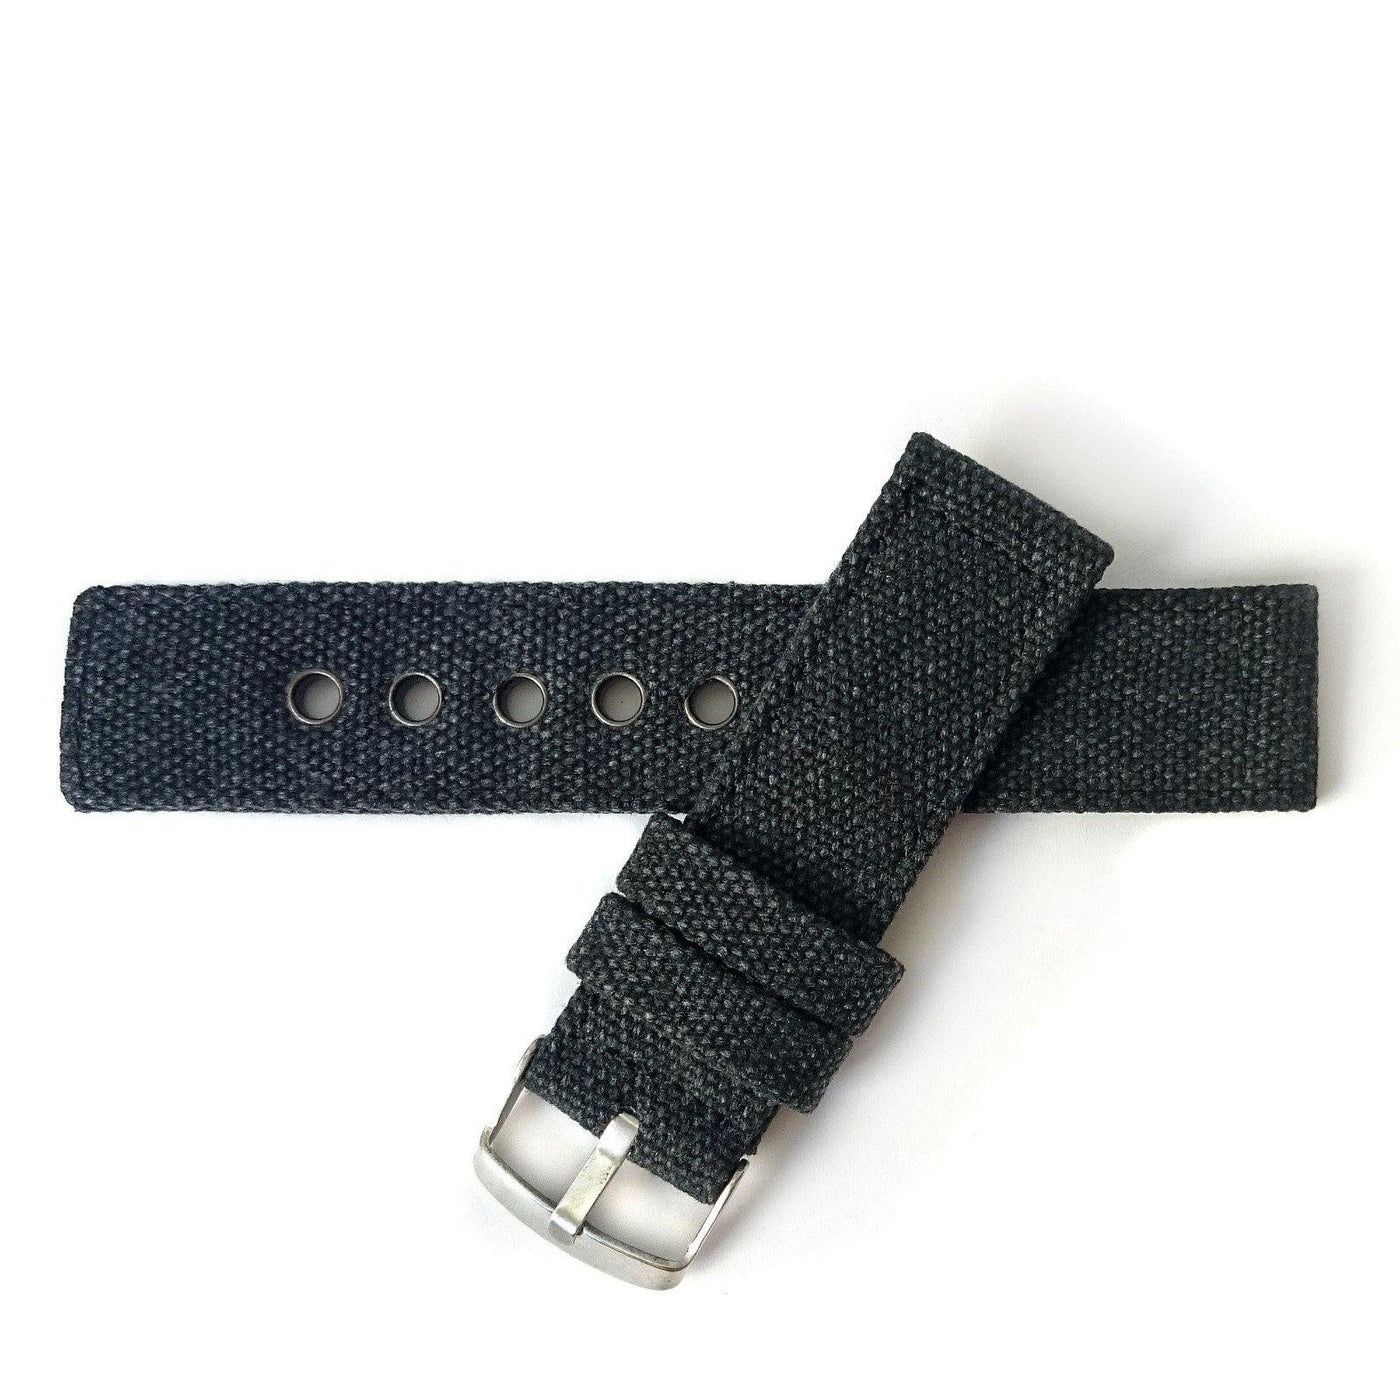 RUGGED CANVAS CHARCOAL - The Sydney Strap Co.